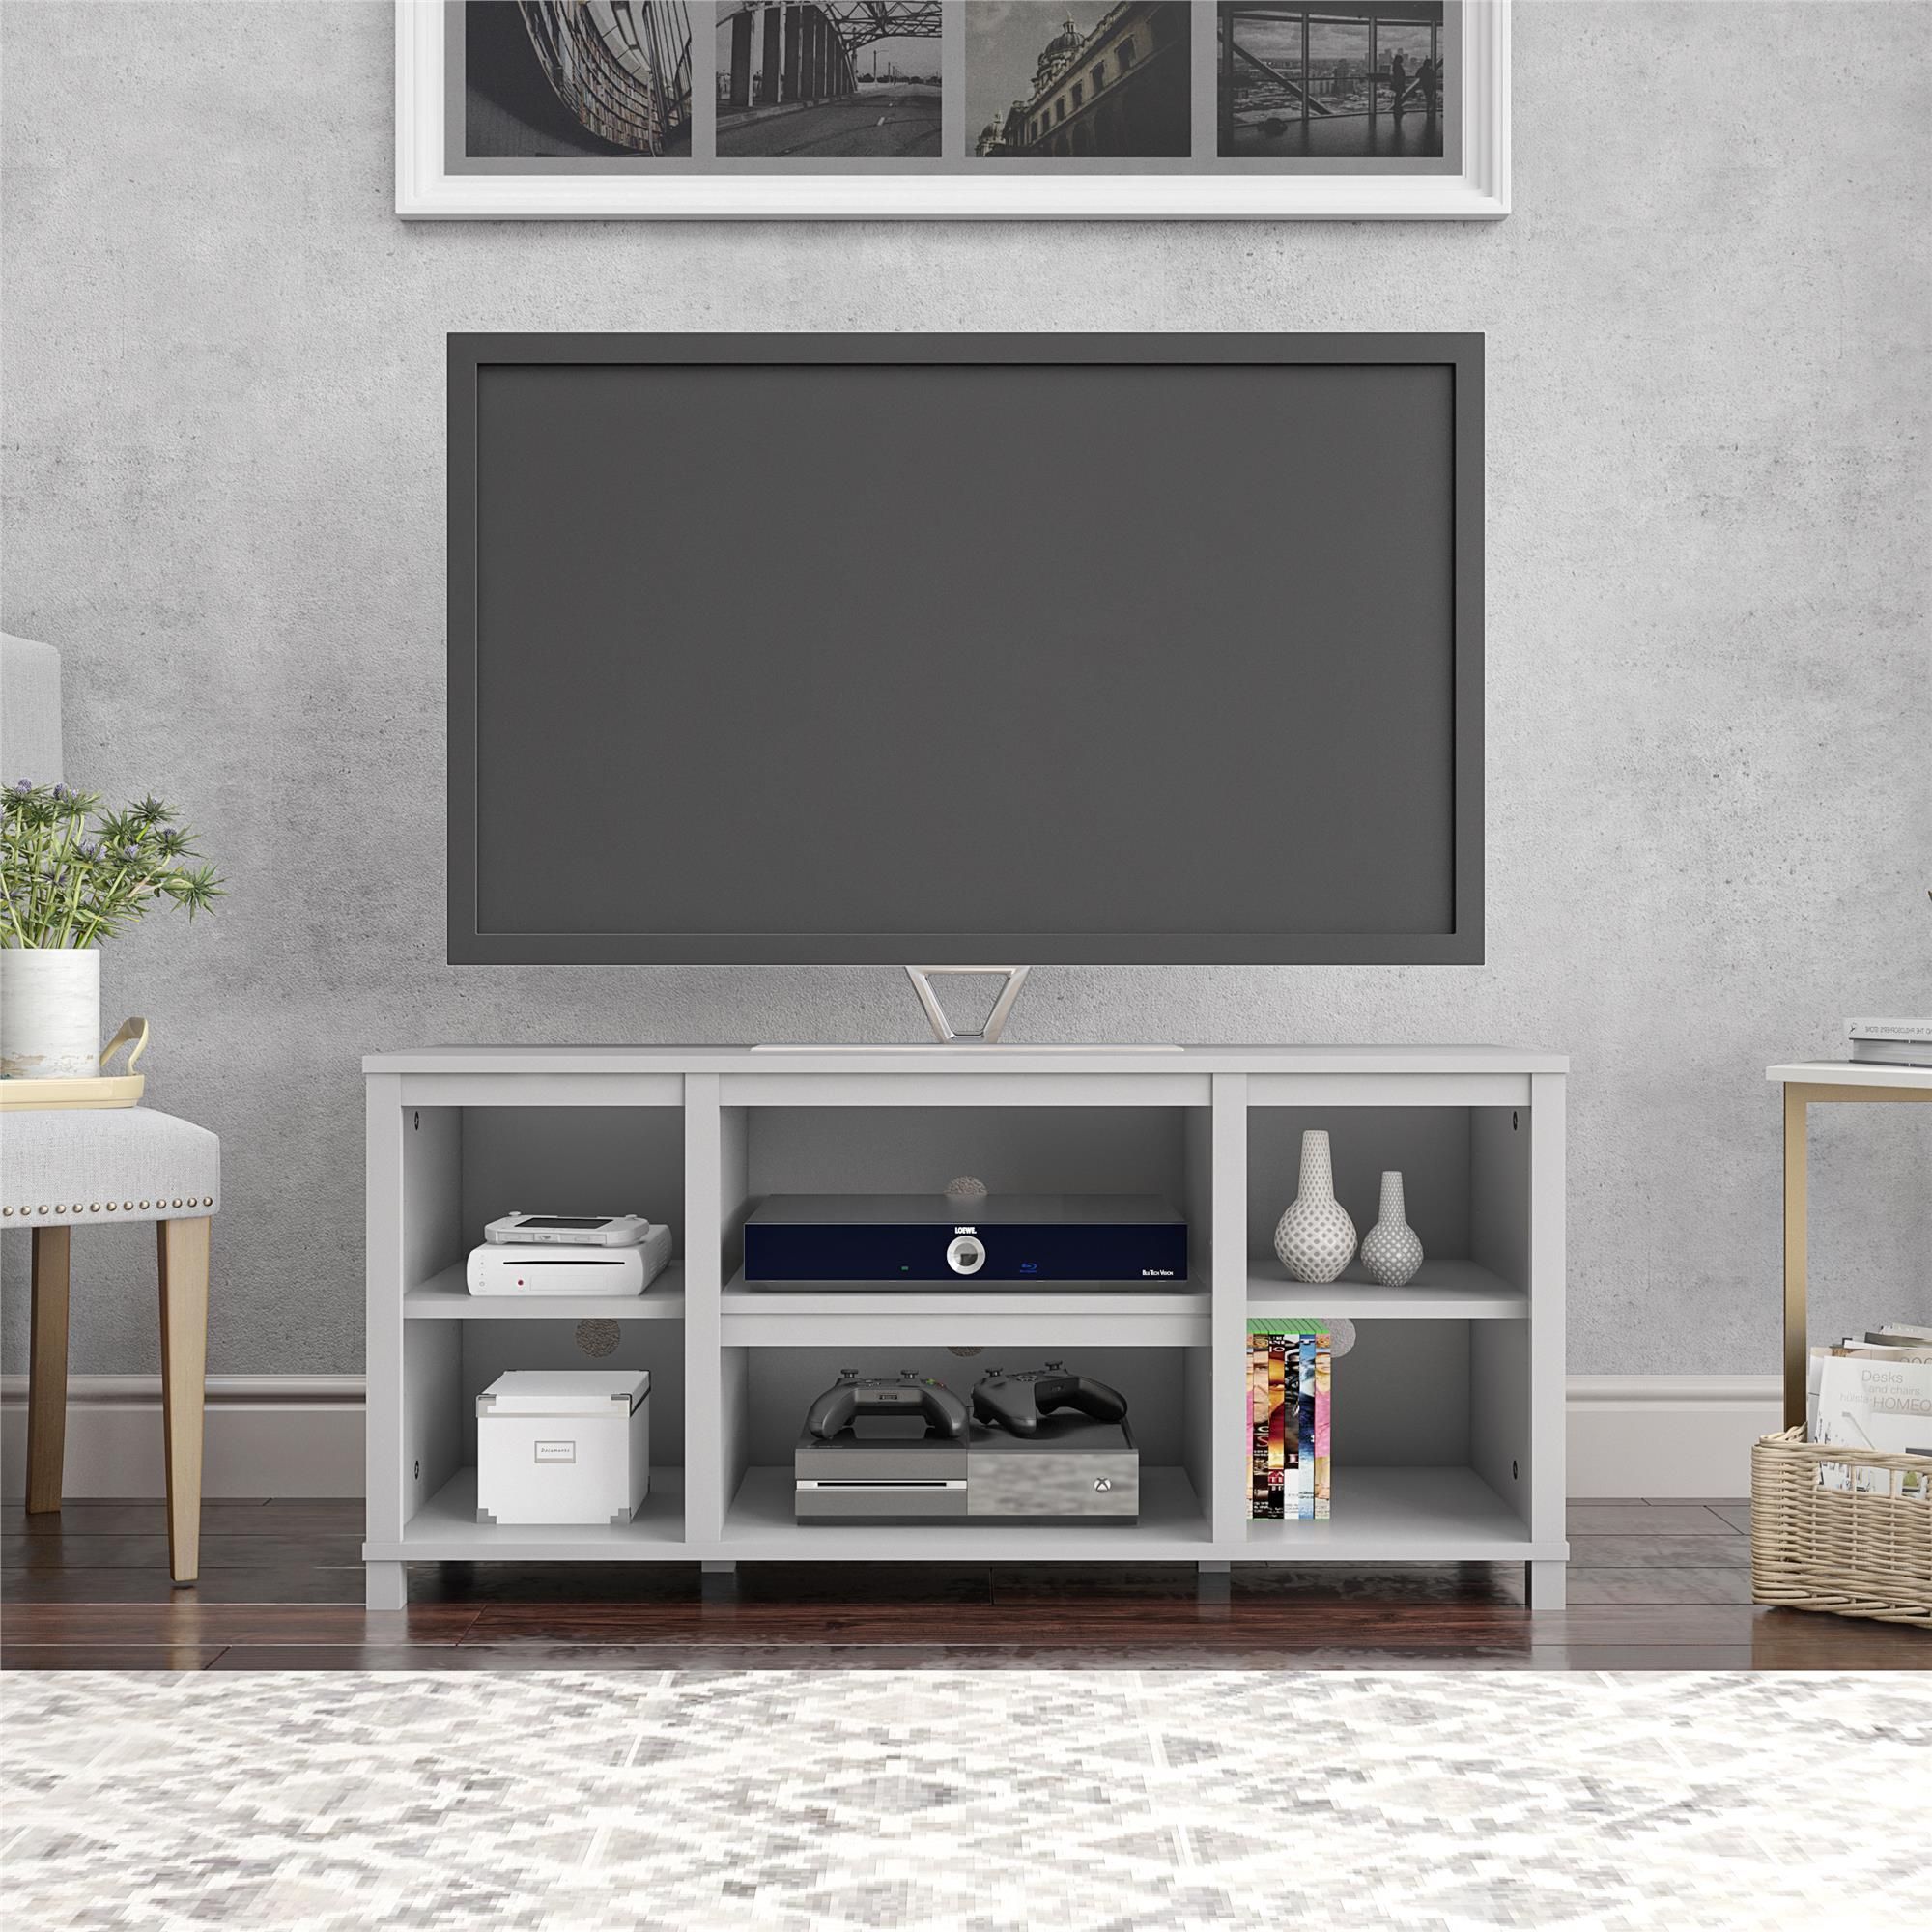 Mainstays Parsons Cubby Tv Stand For Tvs Up To 50", Dove Intended For Penelope Dove Grey Tv Stands (View 3 of 15)